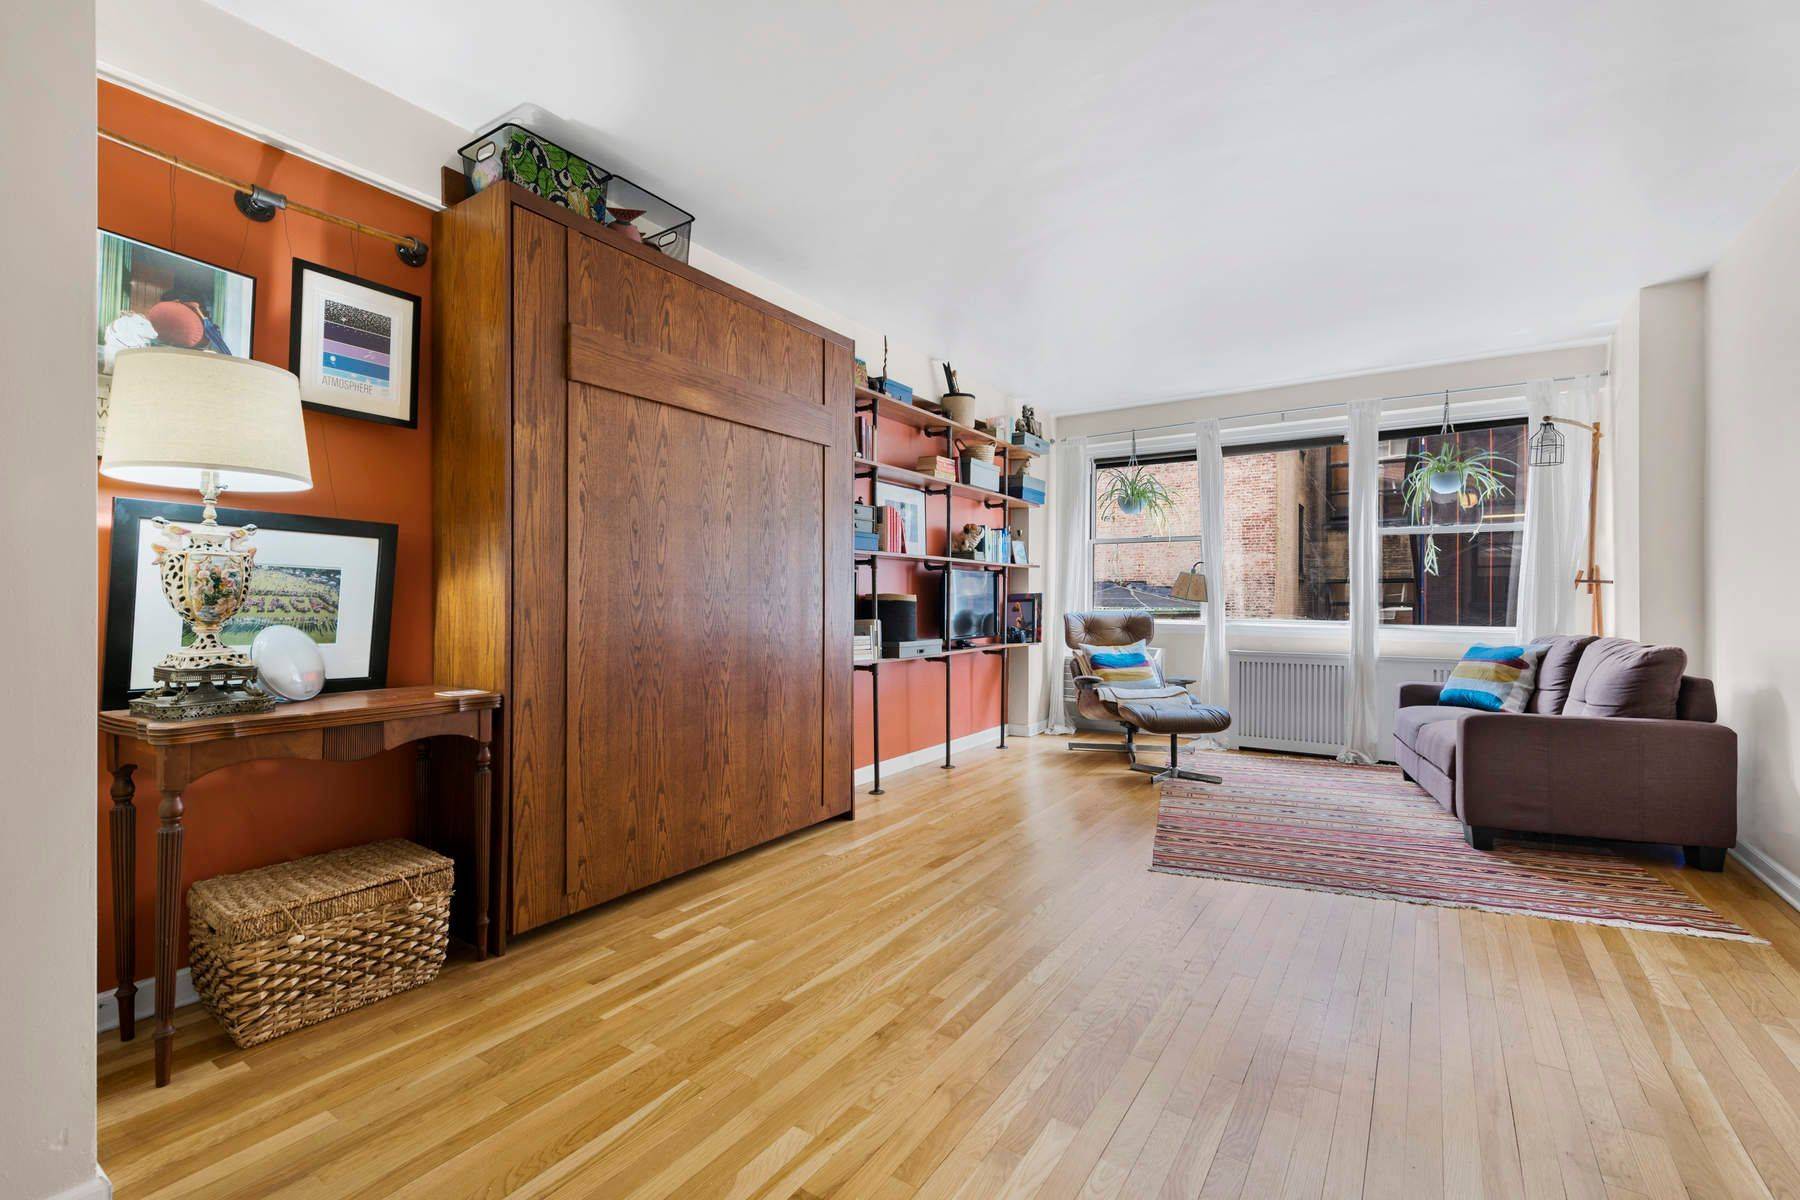 This Hudson Yards Bright Studio features ; a Foyer entrance bringing you into a Gorgeous separate Renovated Kitchen with Stainless Steel Appliances and Granite Countertops, South facing Wall of Windows ...